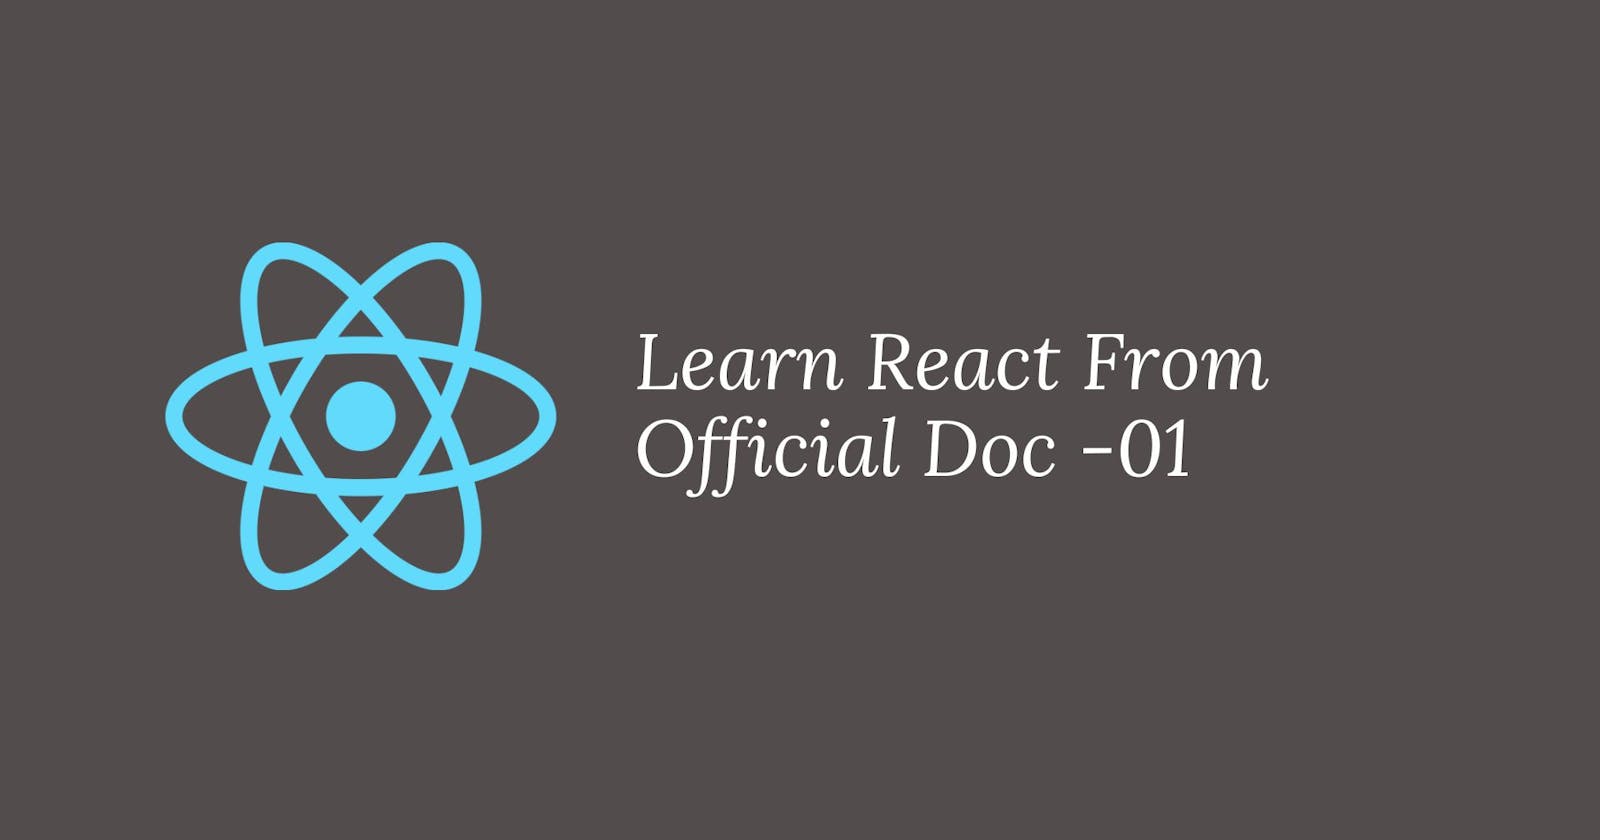 Learn React From Official Doc -01